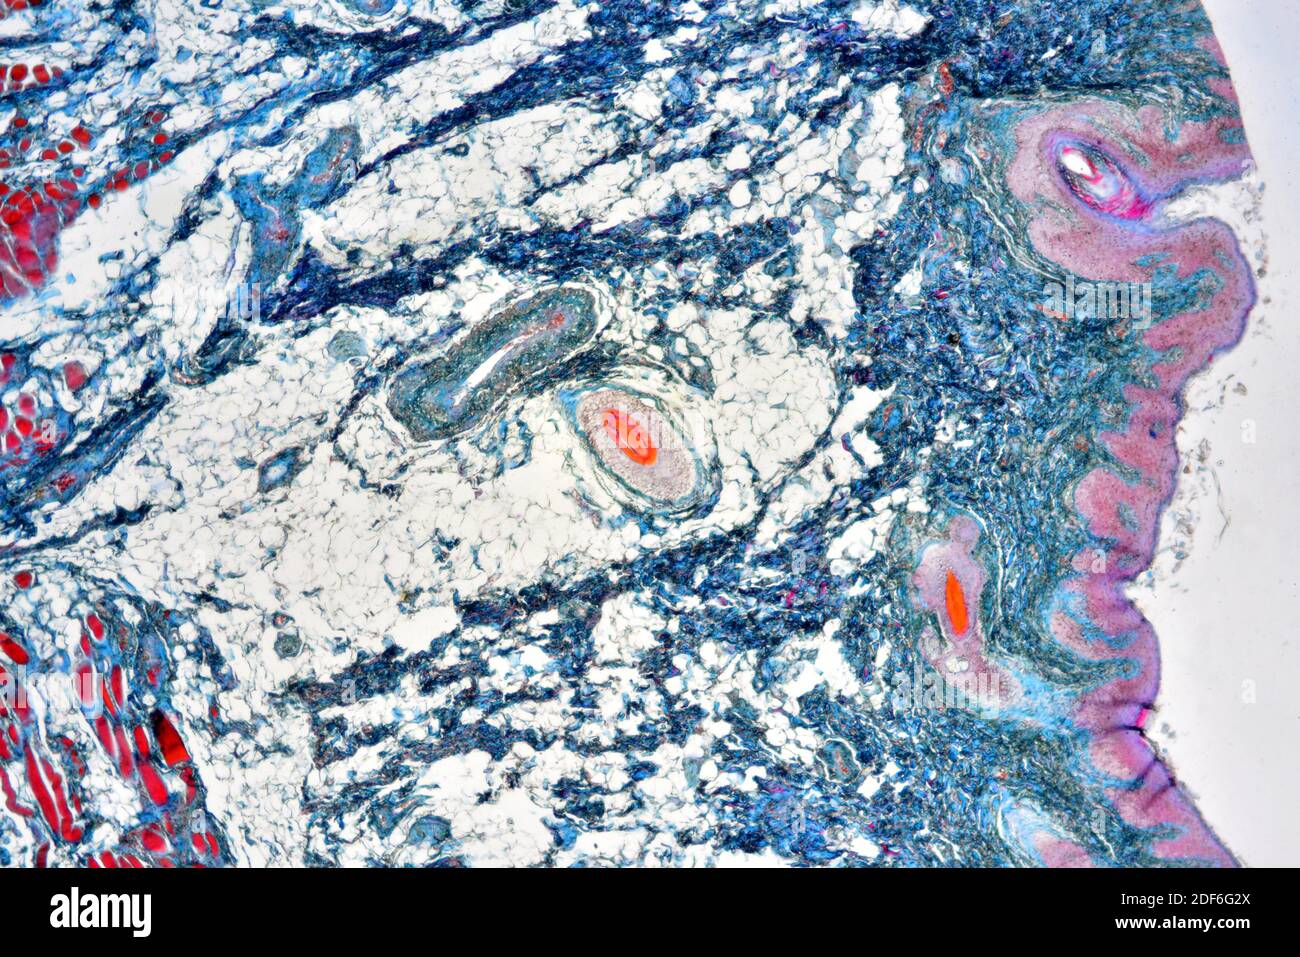 Rectum (large intestine) showing serosa, connective tissue, muscle, adipose tissue and vessels. Optical microscope X40. Stock Photo